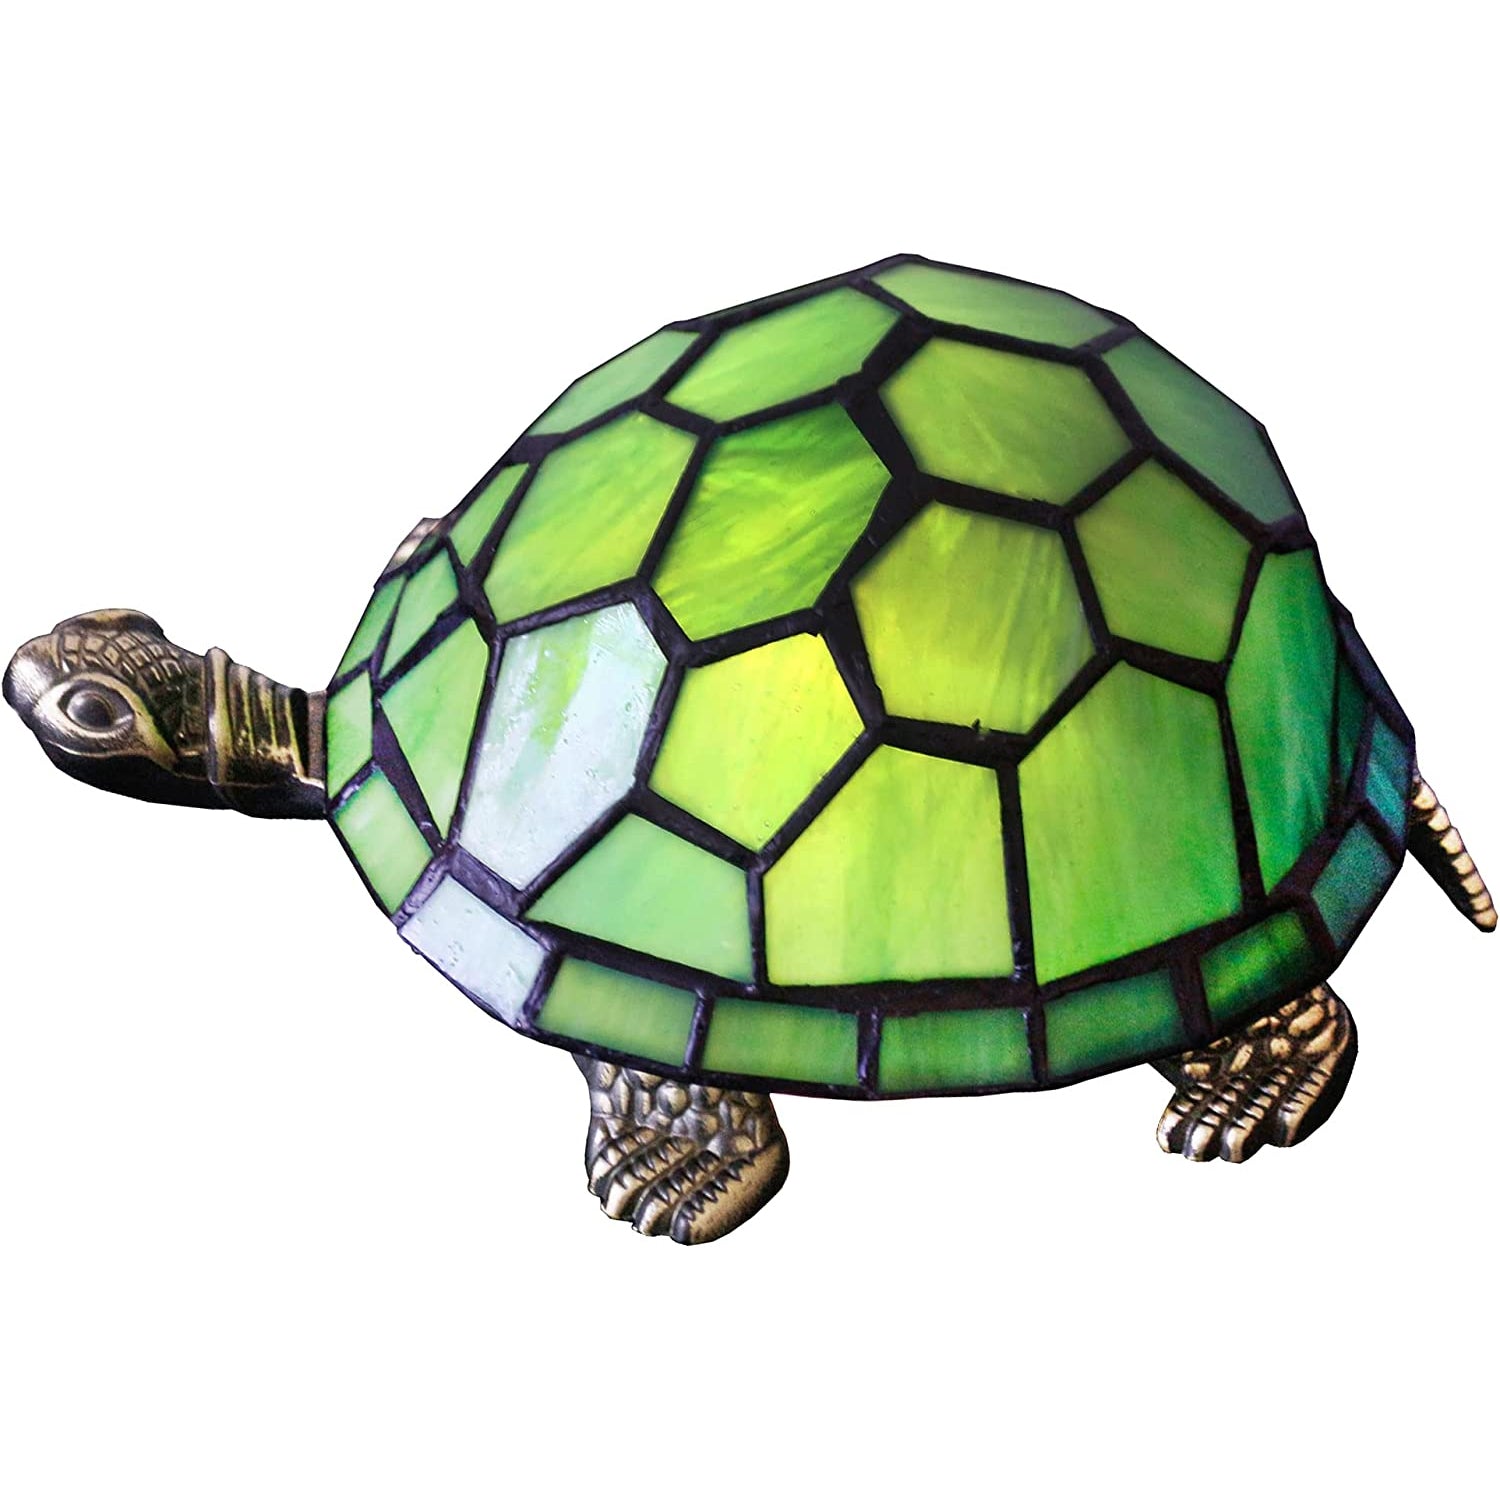 Werfactory® Tortoise Lamp Tiffany Style Turtle Lamp Green Stained Glass Table Lamp Cute Animal Desk Night Light